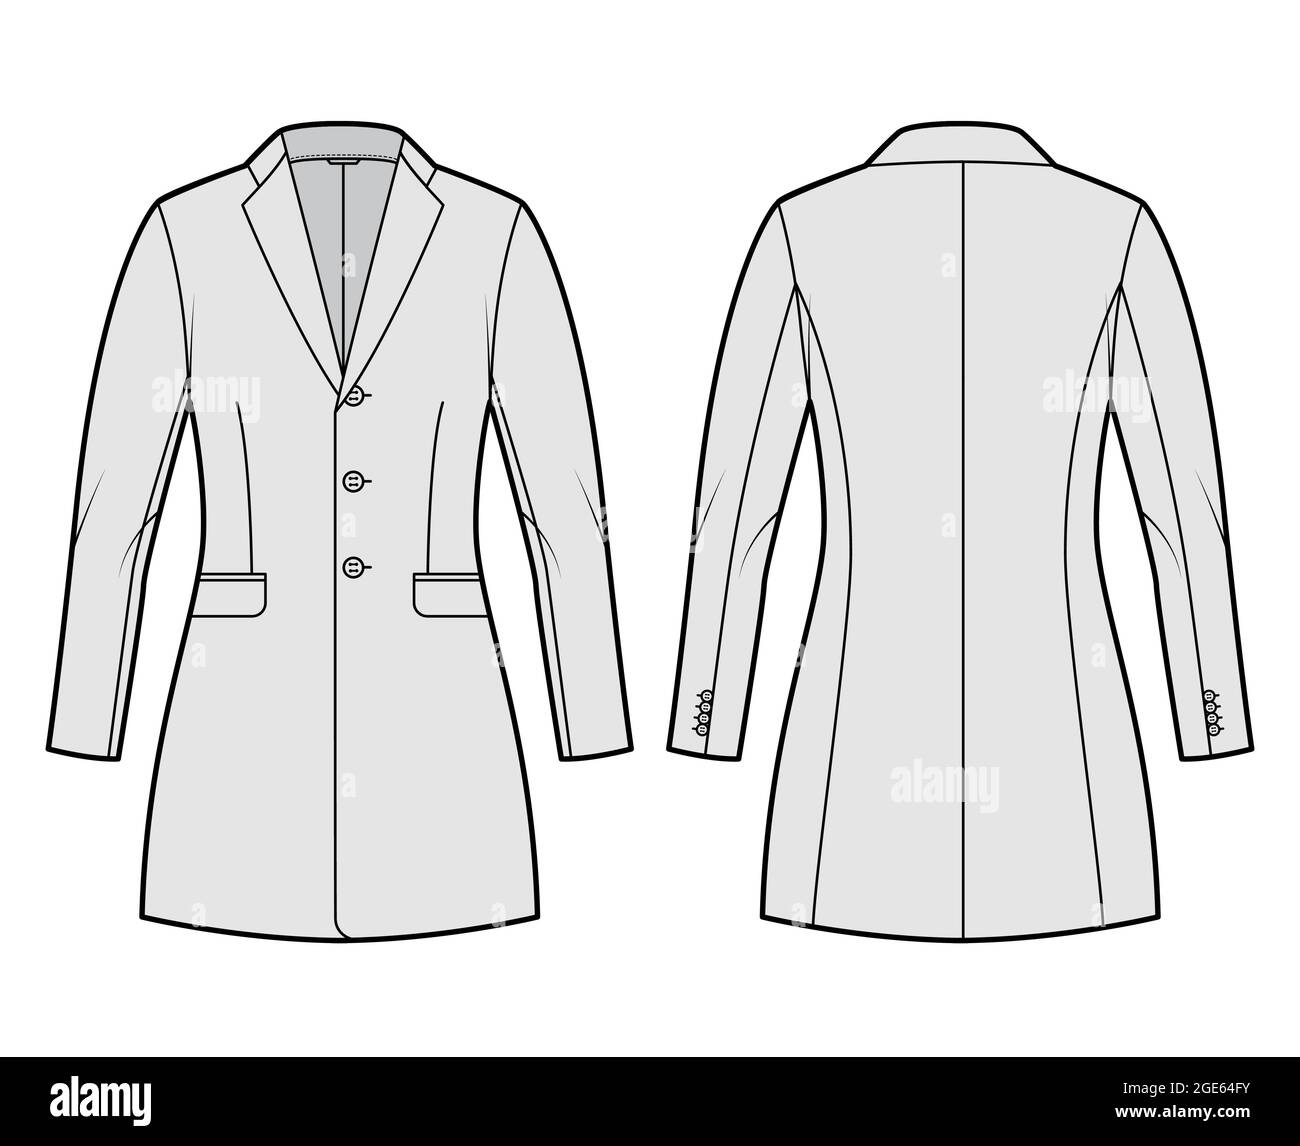 Jacket fitted Blazer structured suit technical fashion illustration ...